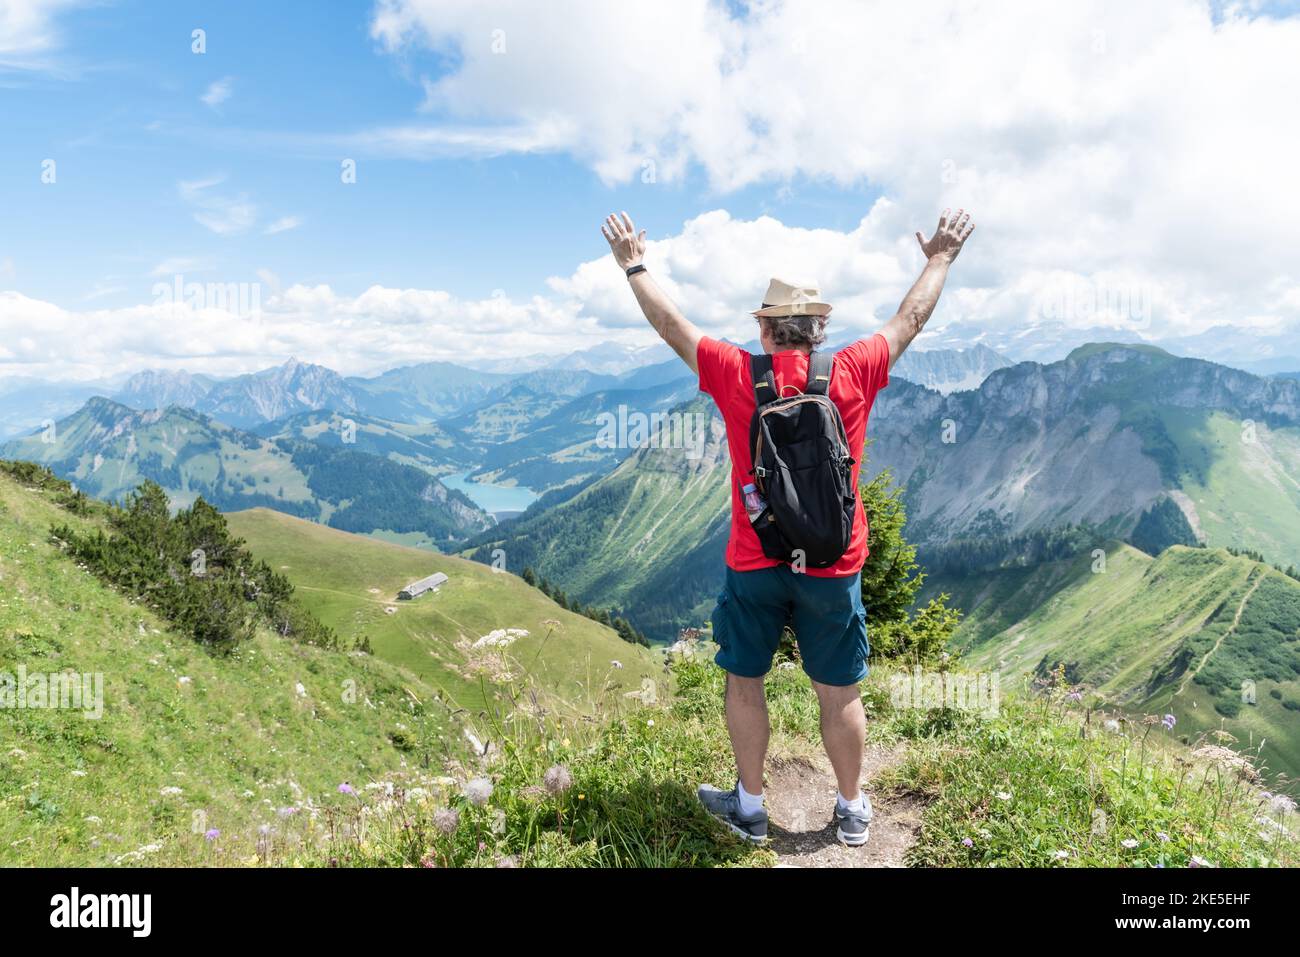 Senior adult man with hat, backpack and red shirt with his arms up looking towards the Swiss Alps. Stock Photo